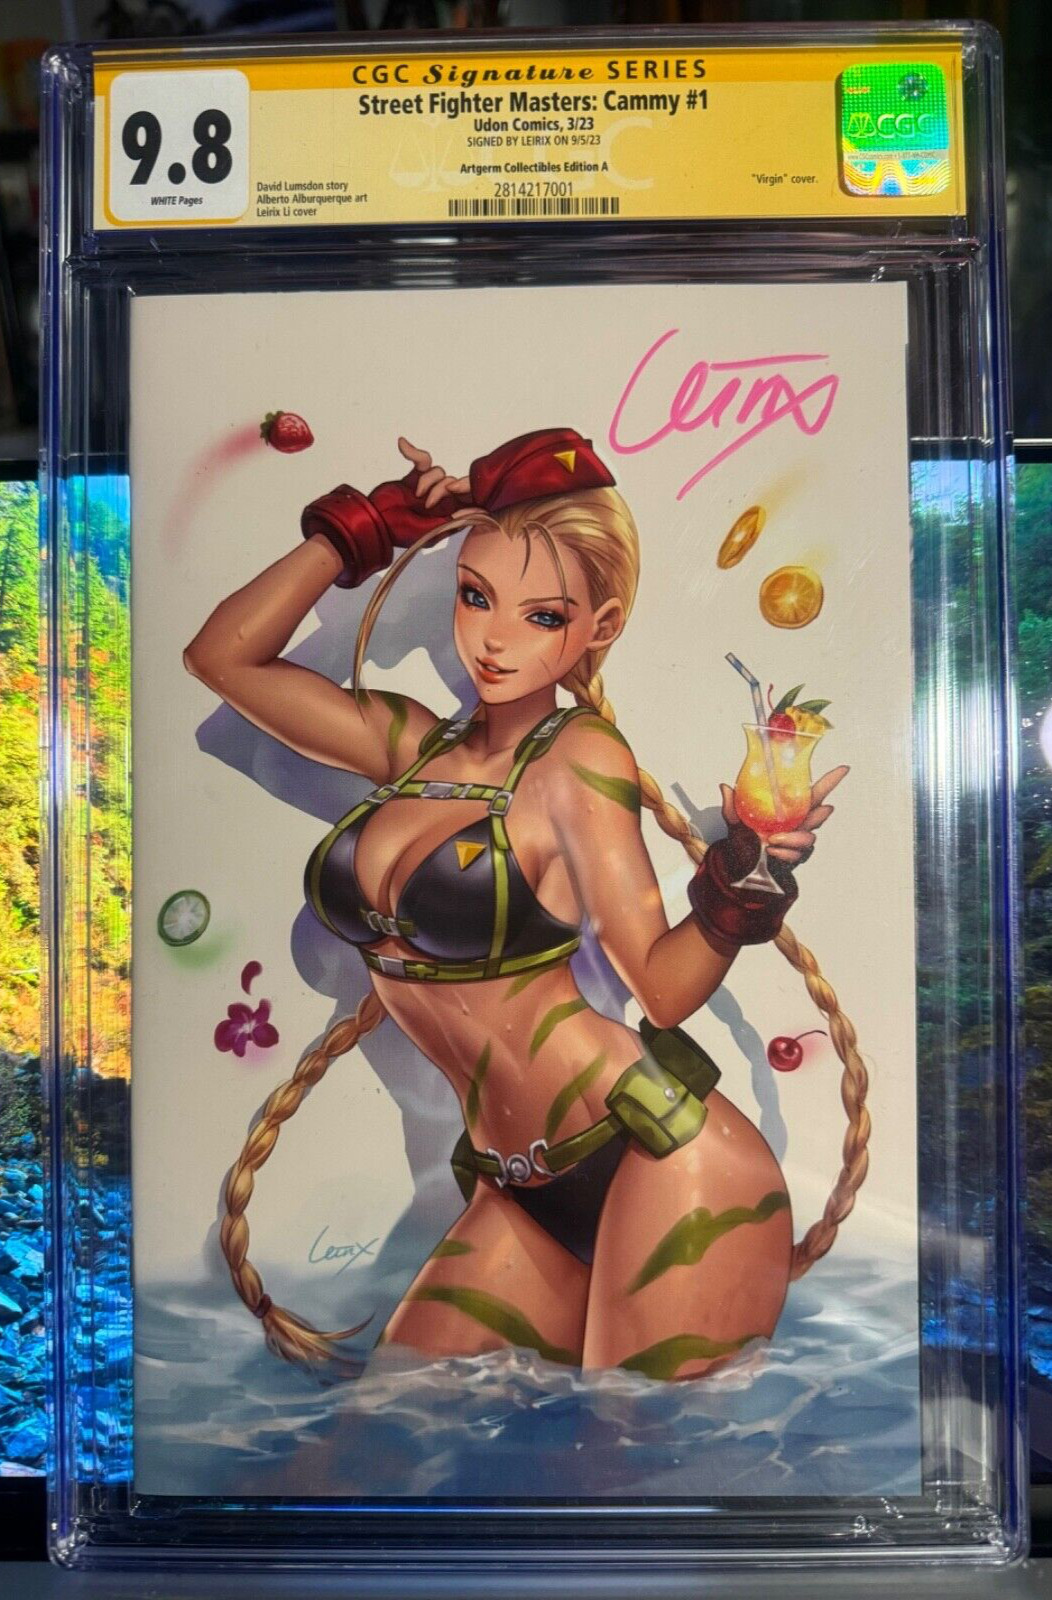 STREET FIGHTER MASTERS CAMMY 1 SIGNED LEIRIX SWIMSUIT PUREART VARIANT CGC SS 9.8